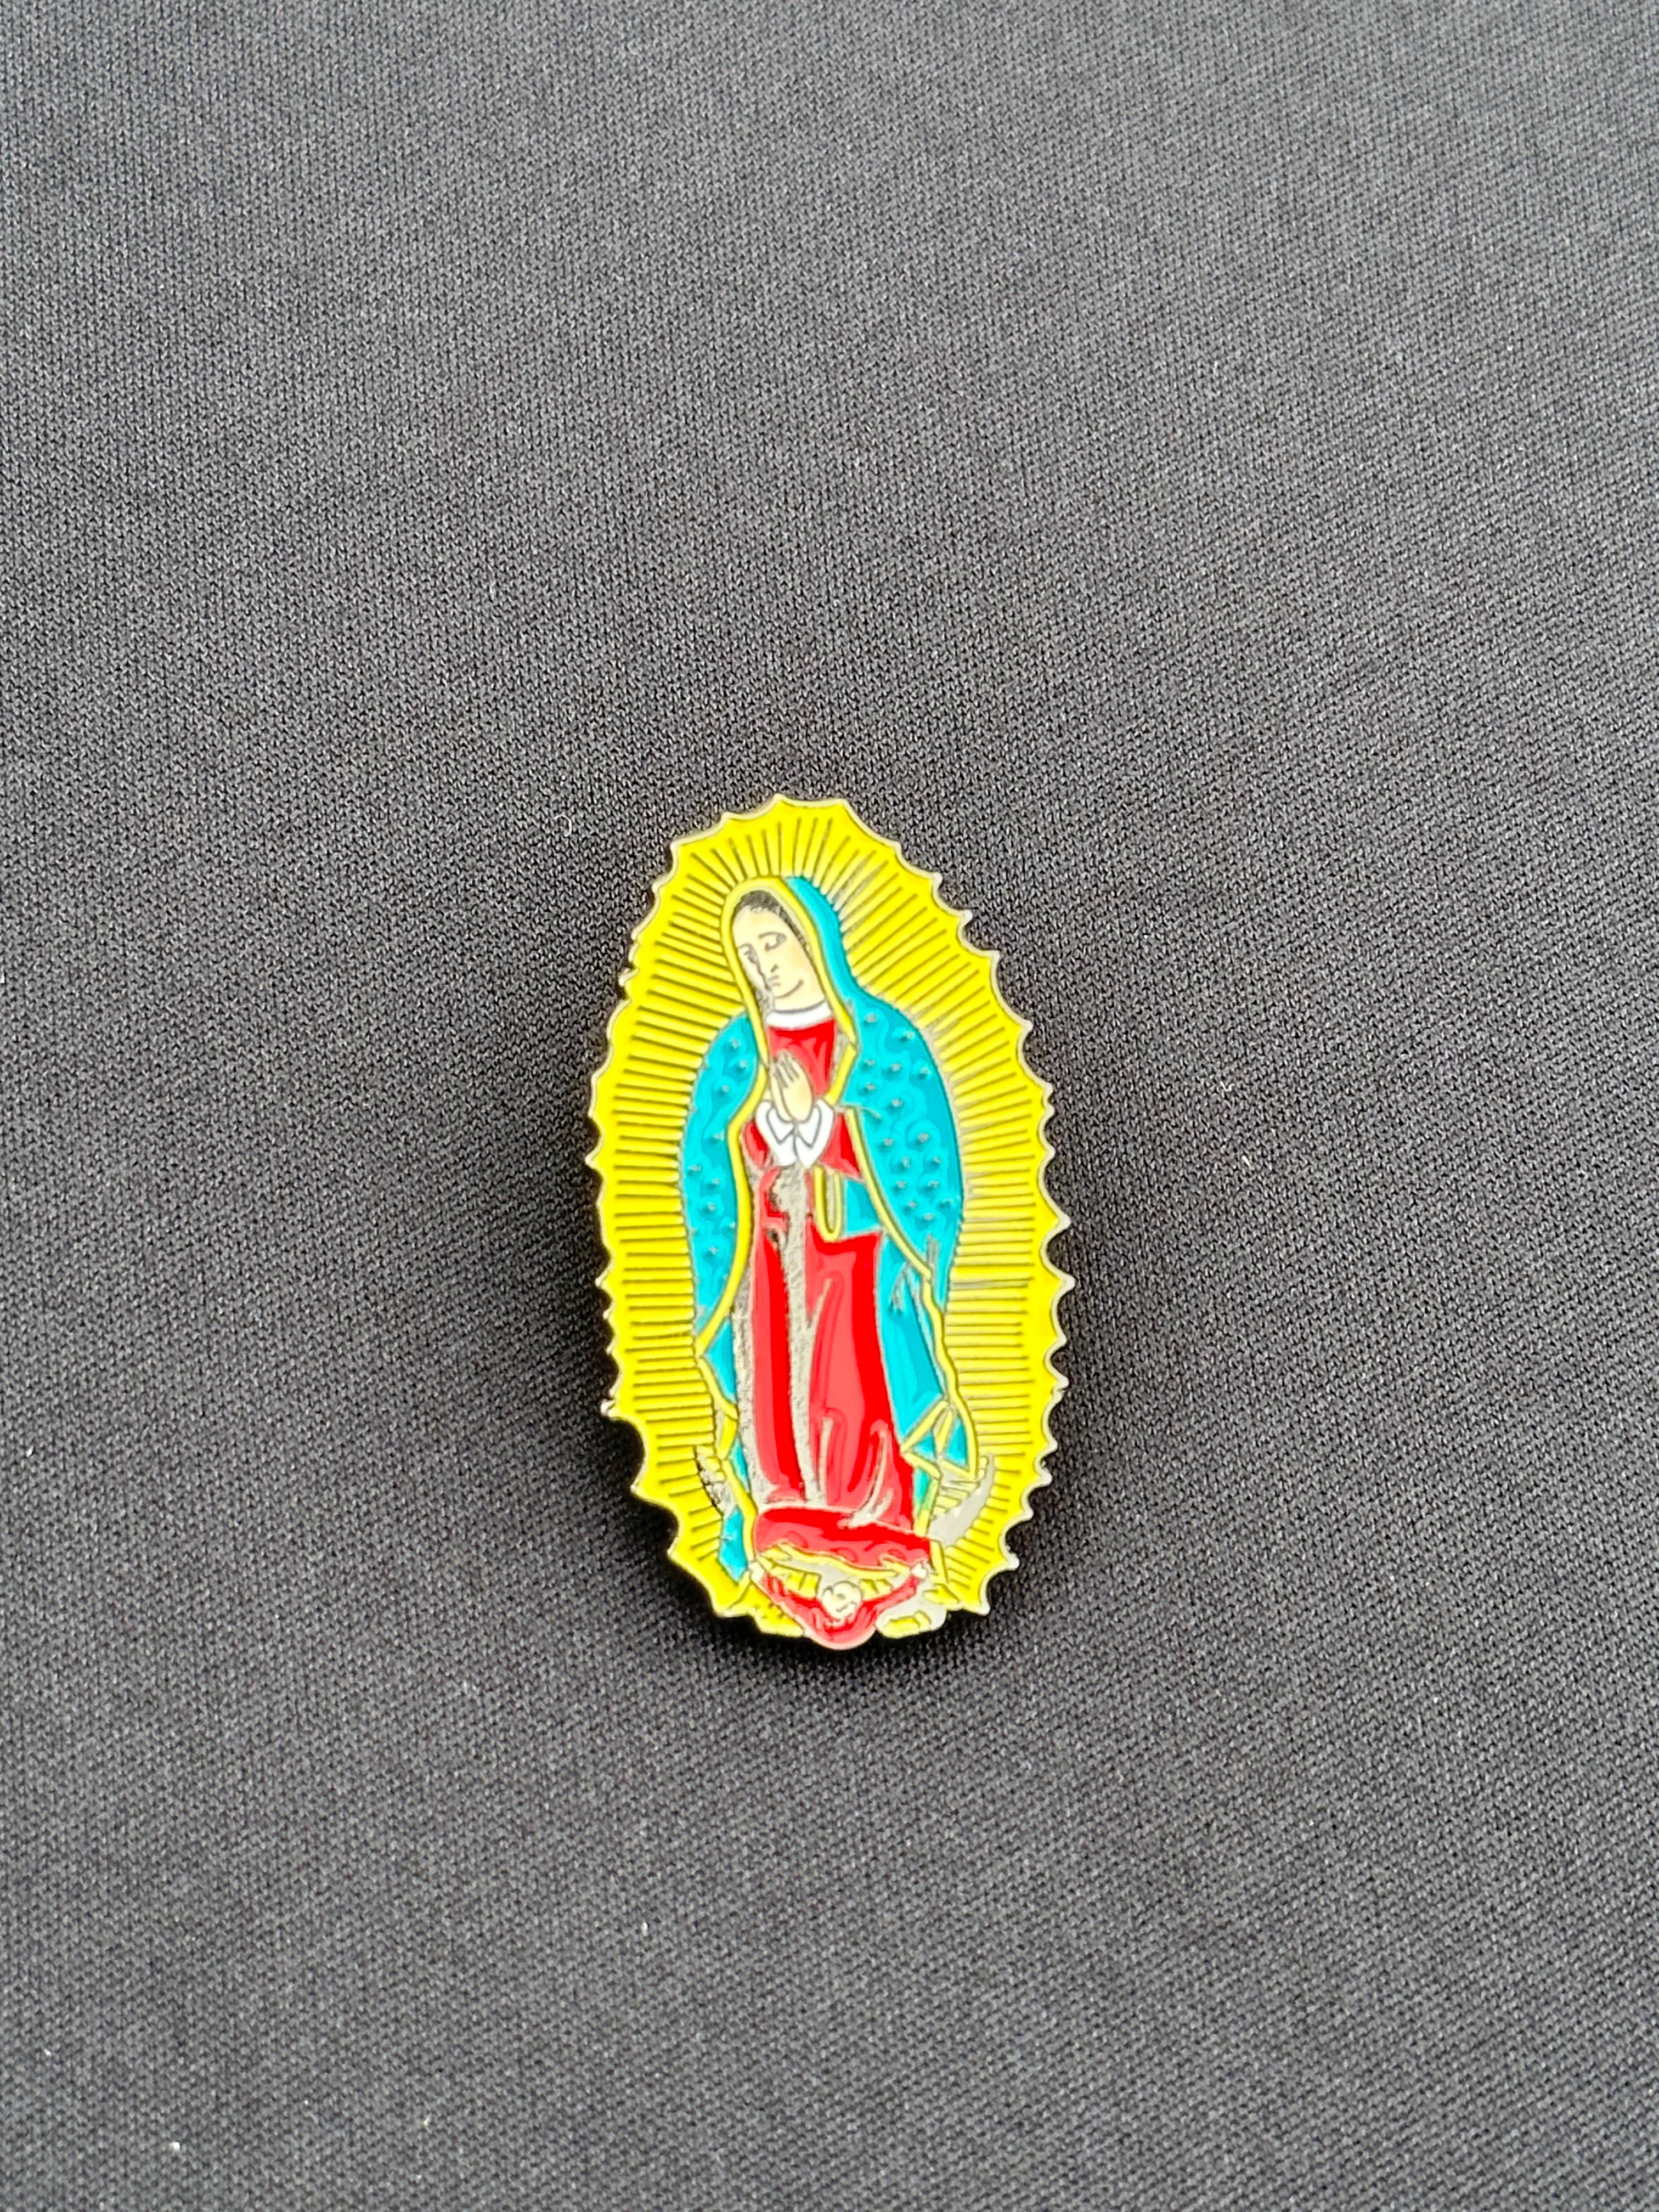 *NEW YELLOW "VIREN DE GUADALUPE" EXCLUSIVE PIN VERY LIMITED